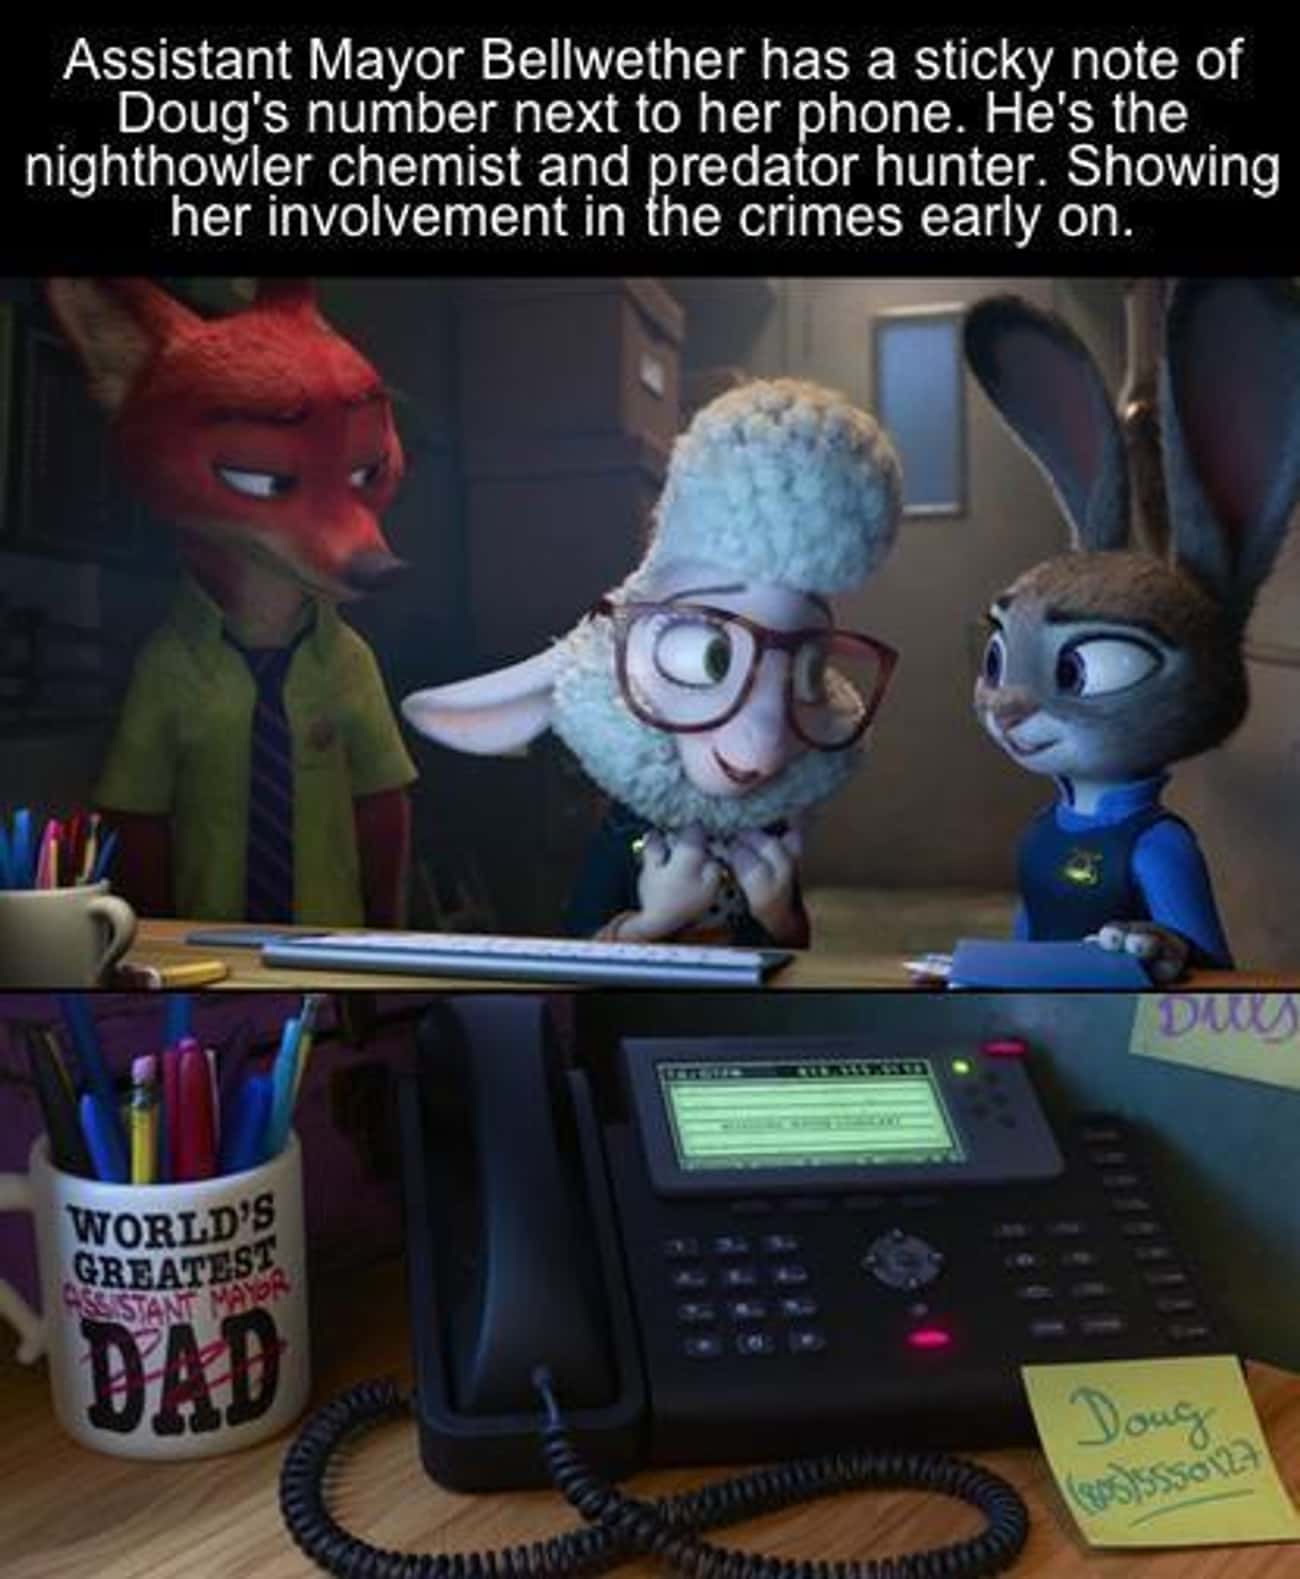 Early Clue Points To Bellwether In 'Zootopia'